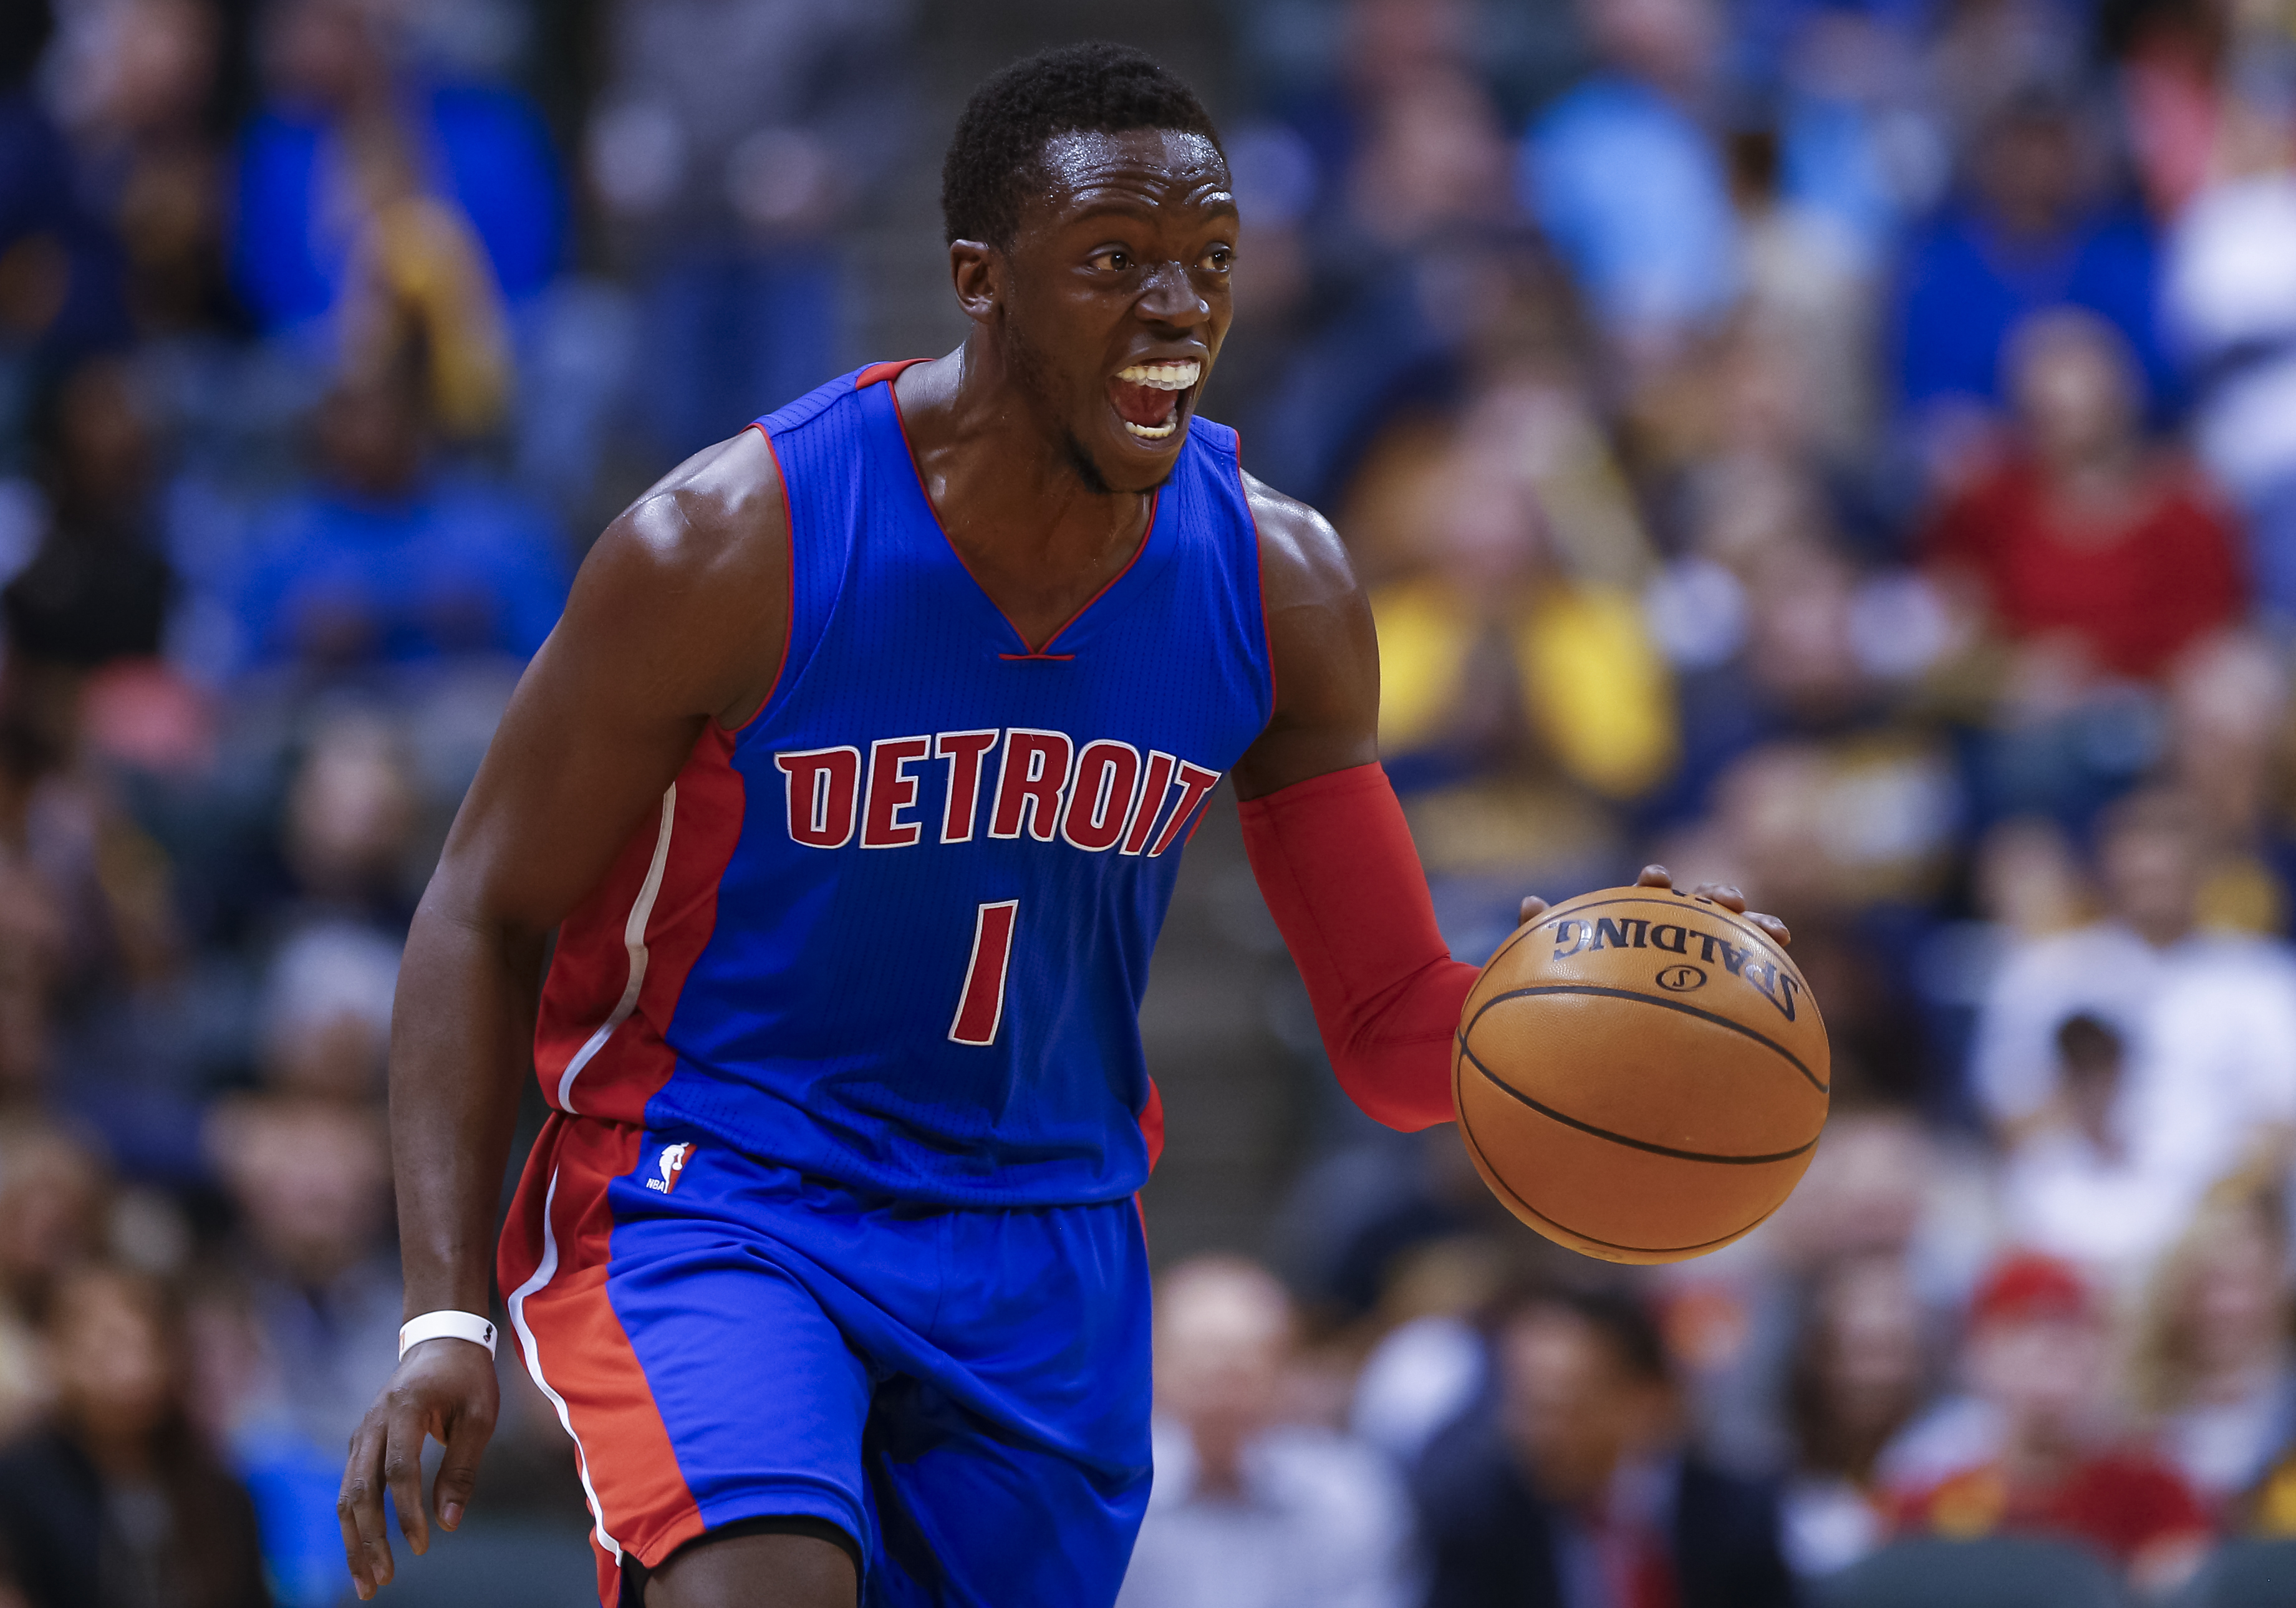 After strong close, Pistons' Reggie Jackson ready for healthy